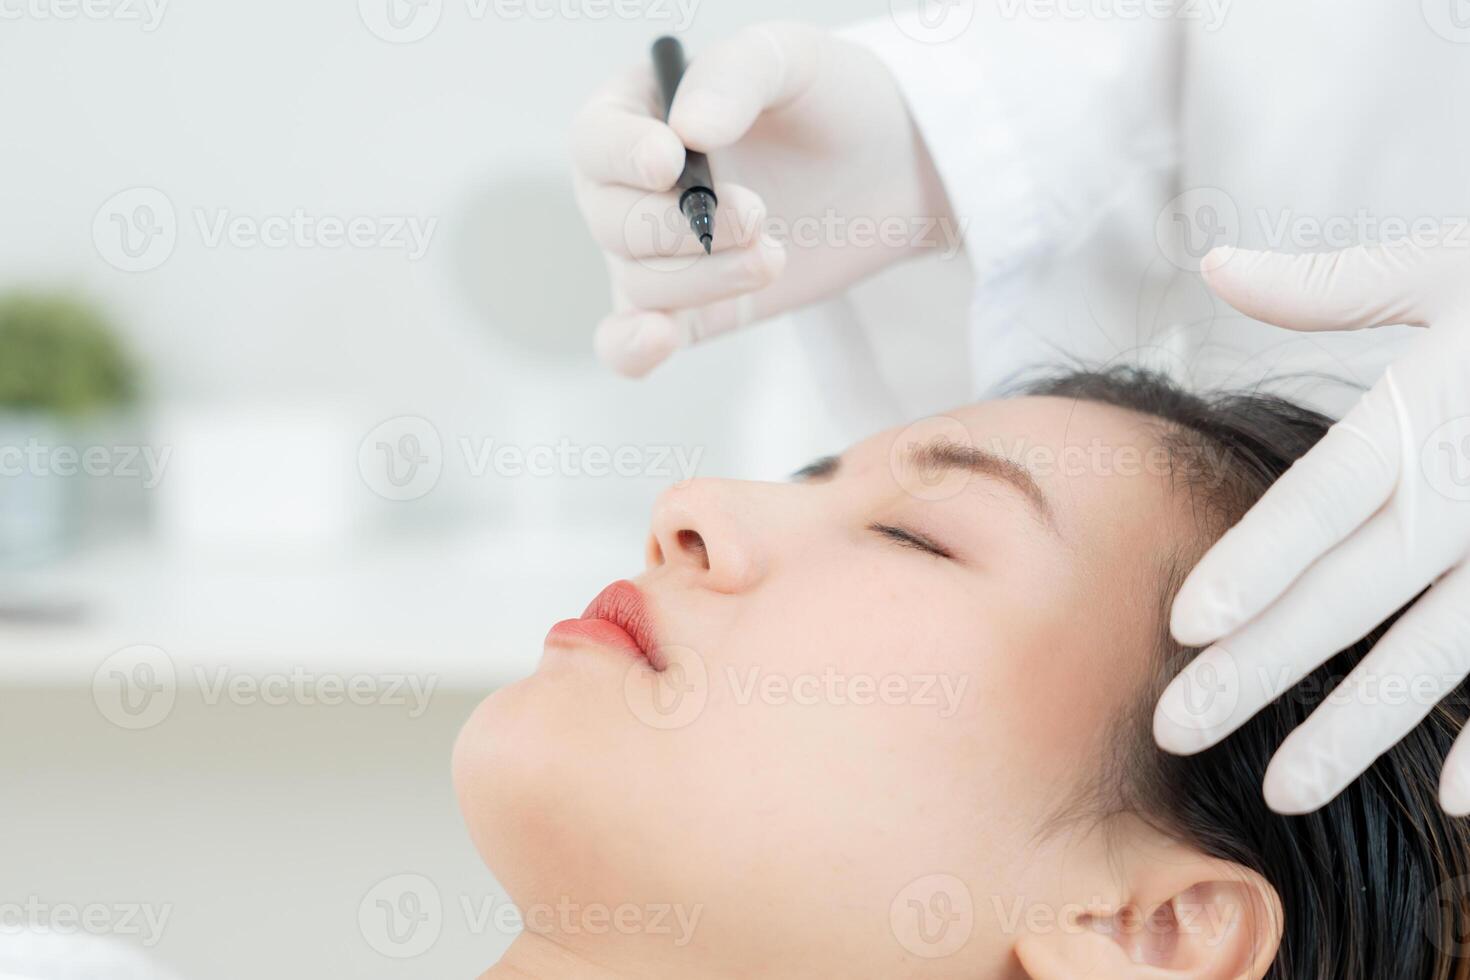 plastic surgery, beauty, Surgeon or beautician touching woman face, surgical procedure that involve altering shape of nose, doctor examines patient nose before rhinoplasty, medical assistance, health photo